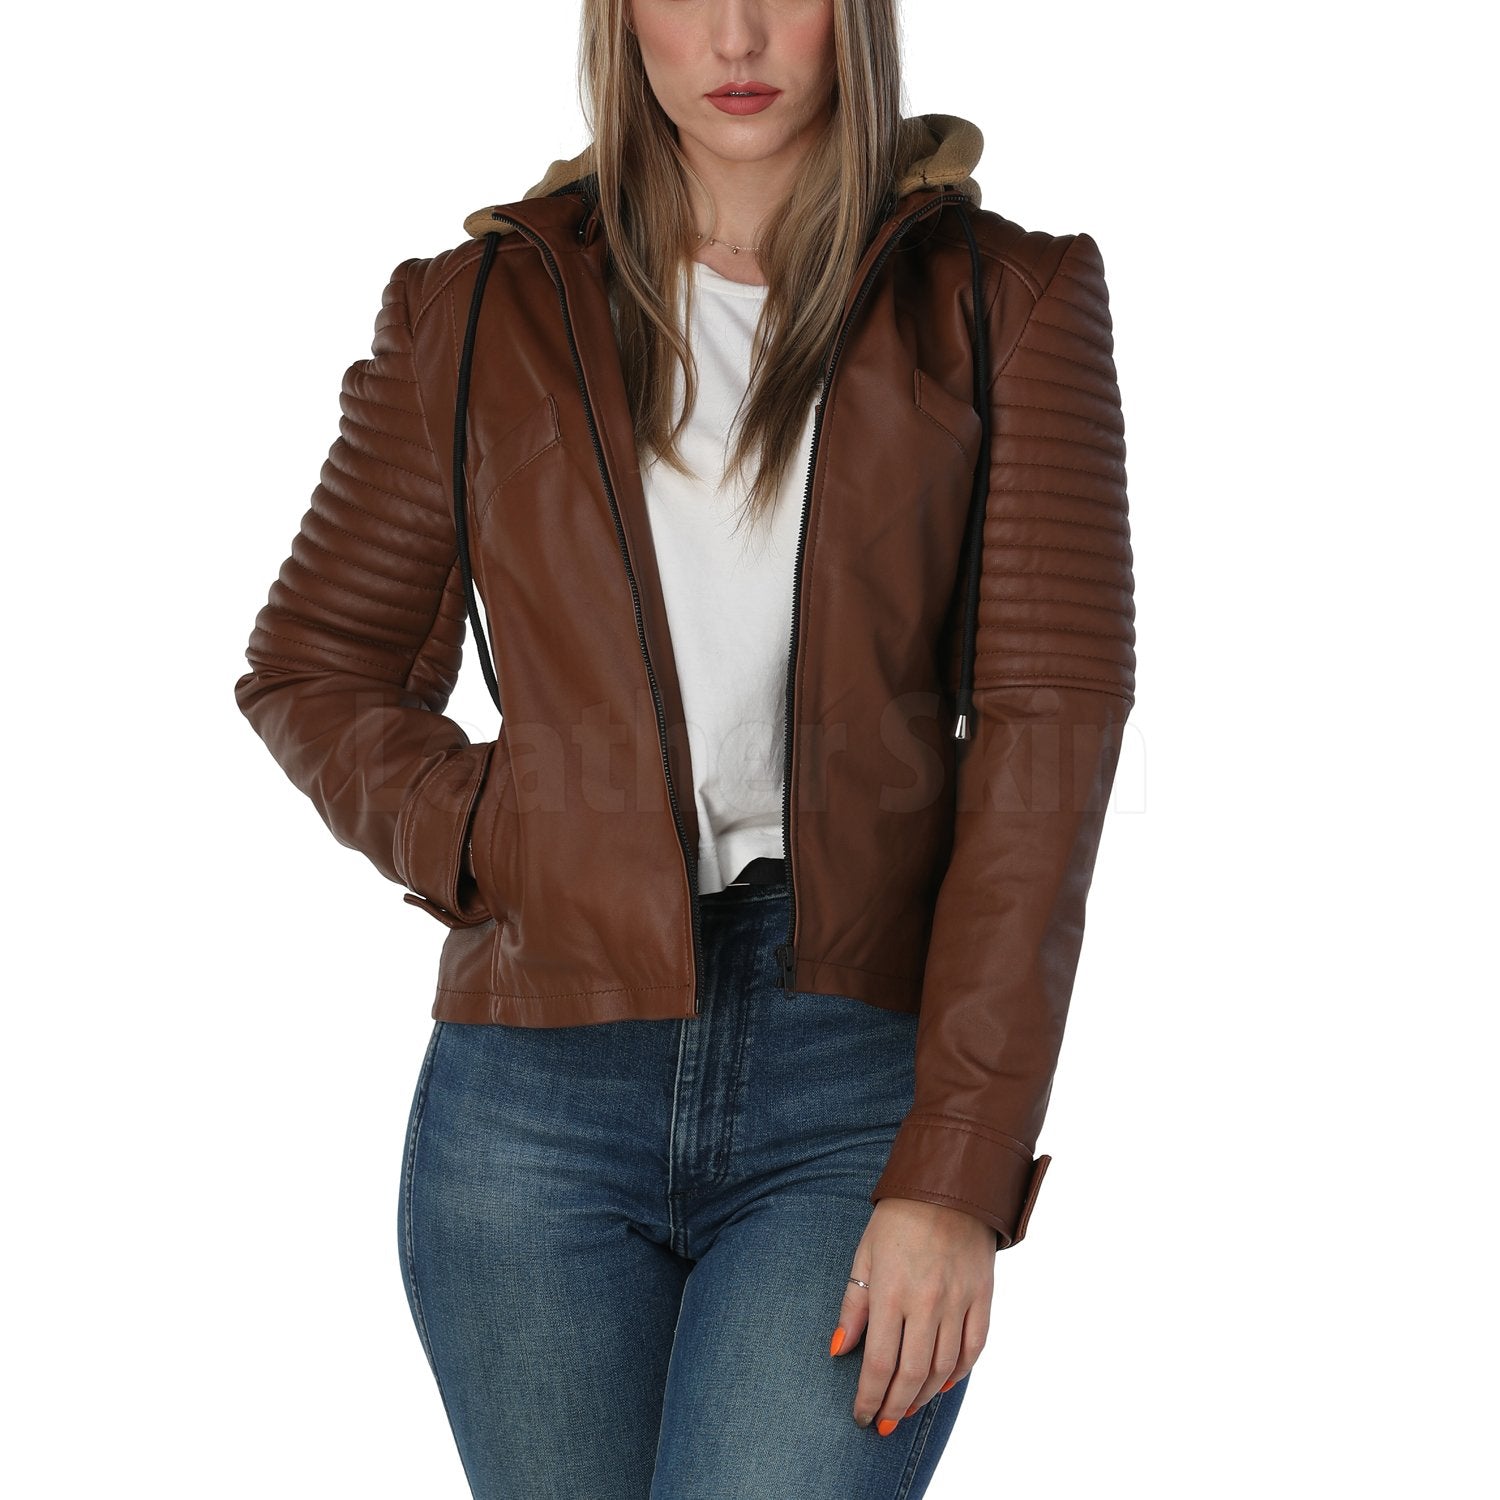 Rey Brown Hooded Leather Jacket - Leather Skin Shop